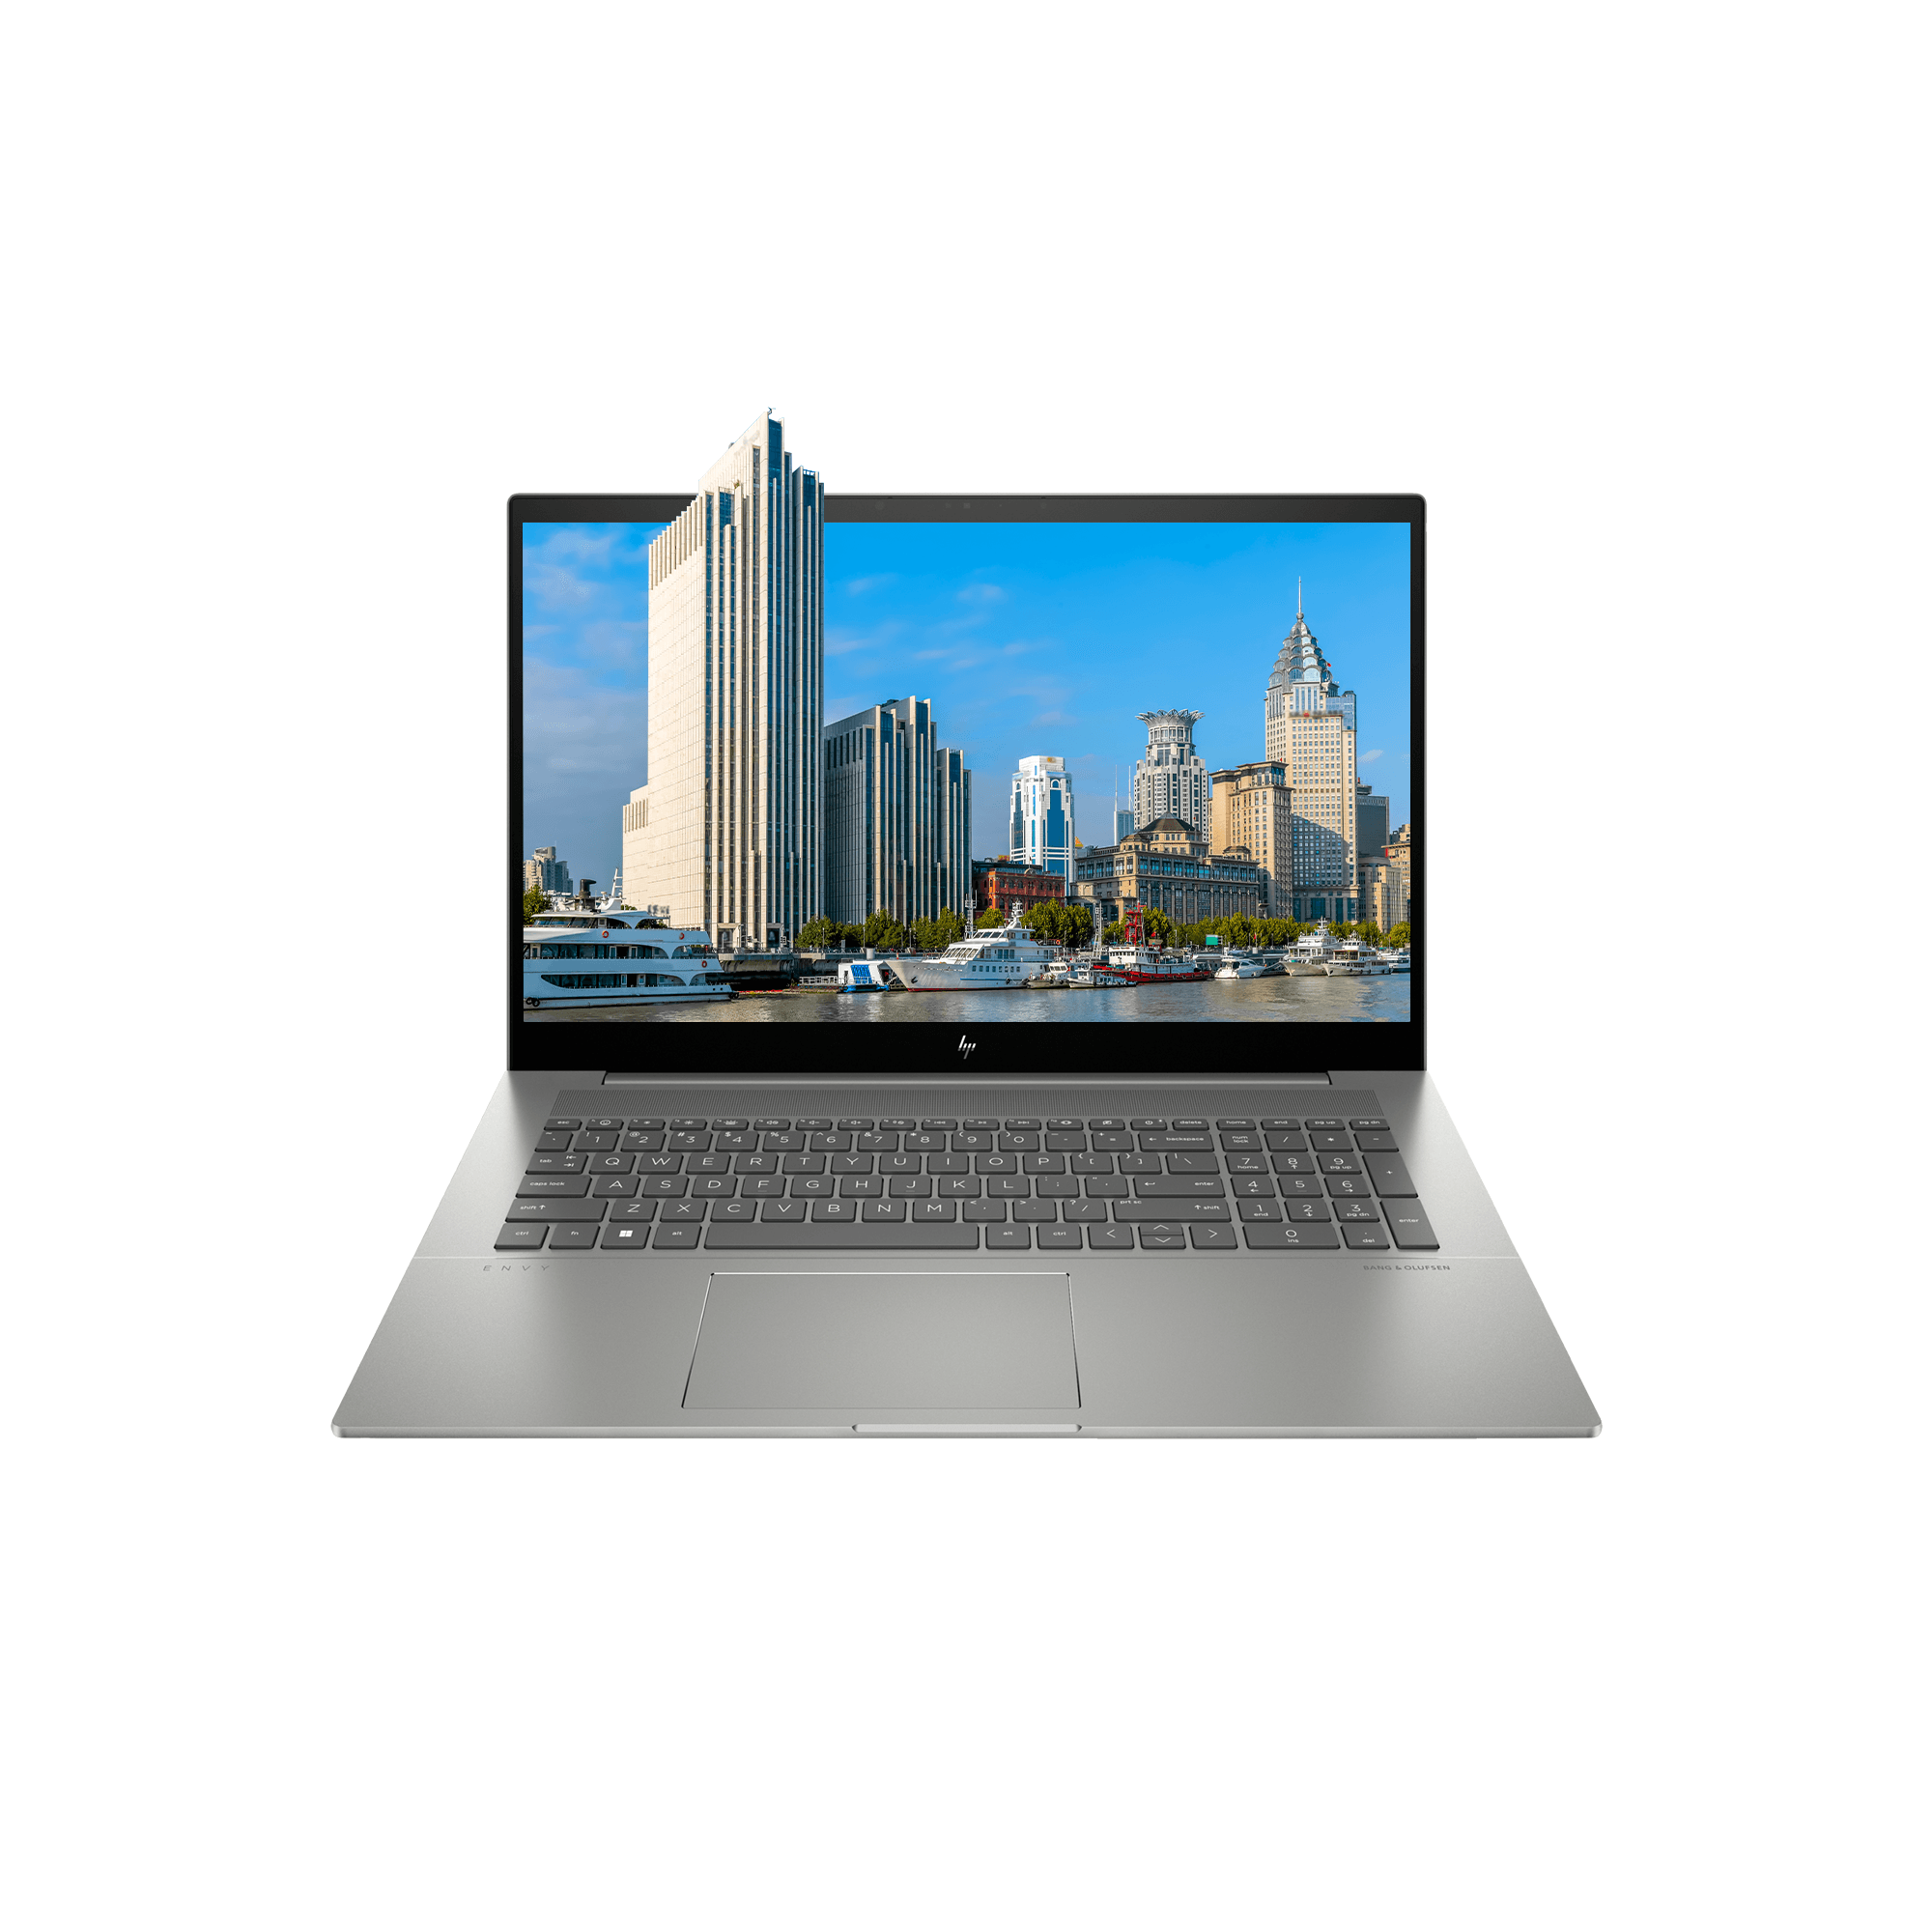 HP Envy 17t Laptop, Intel Core i7-13700H, 17.3" FullHD Touch,  Windows 11 Home, Grey